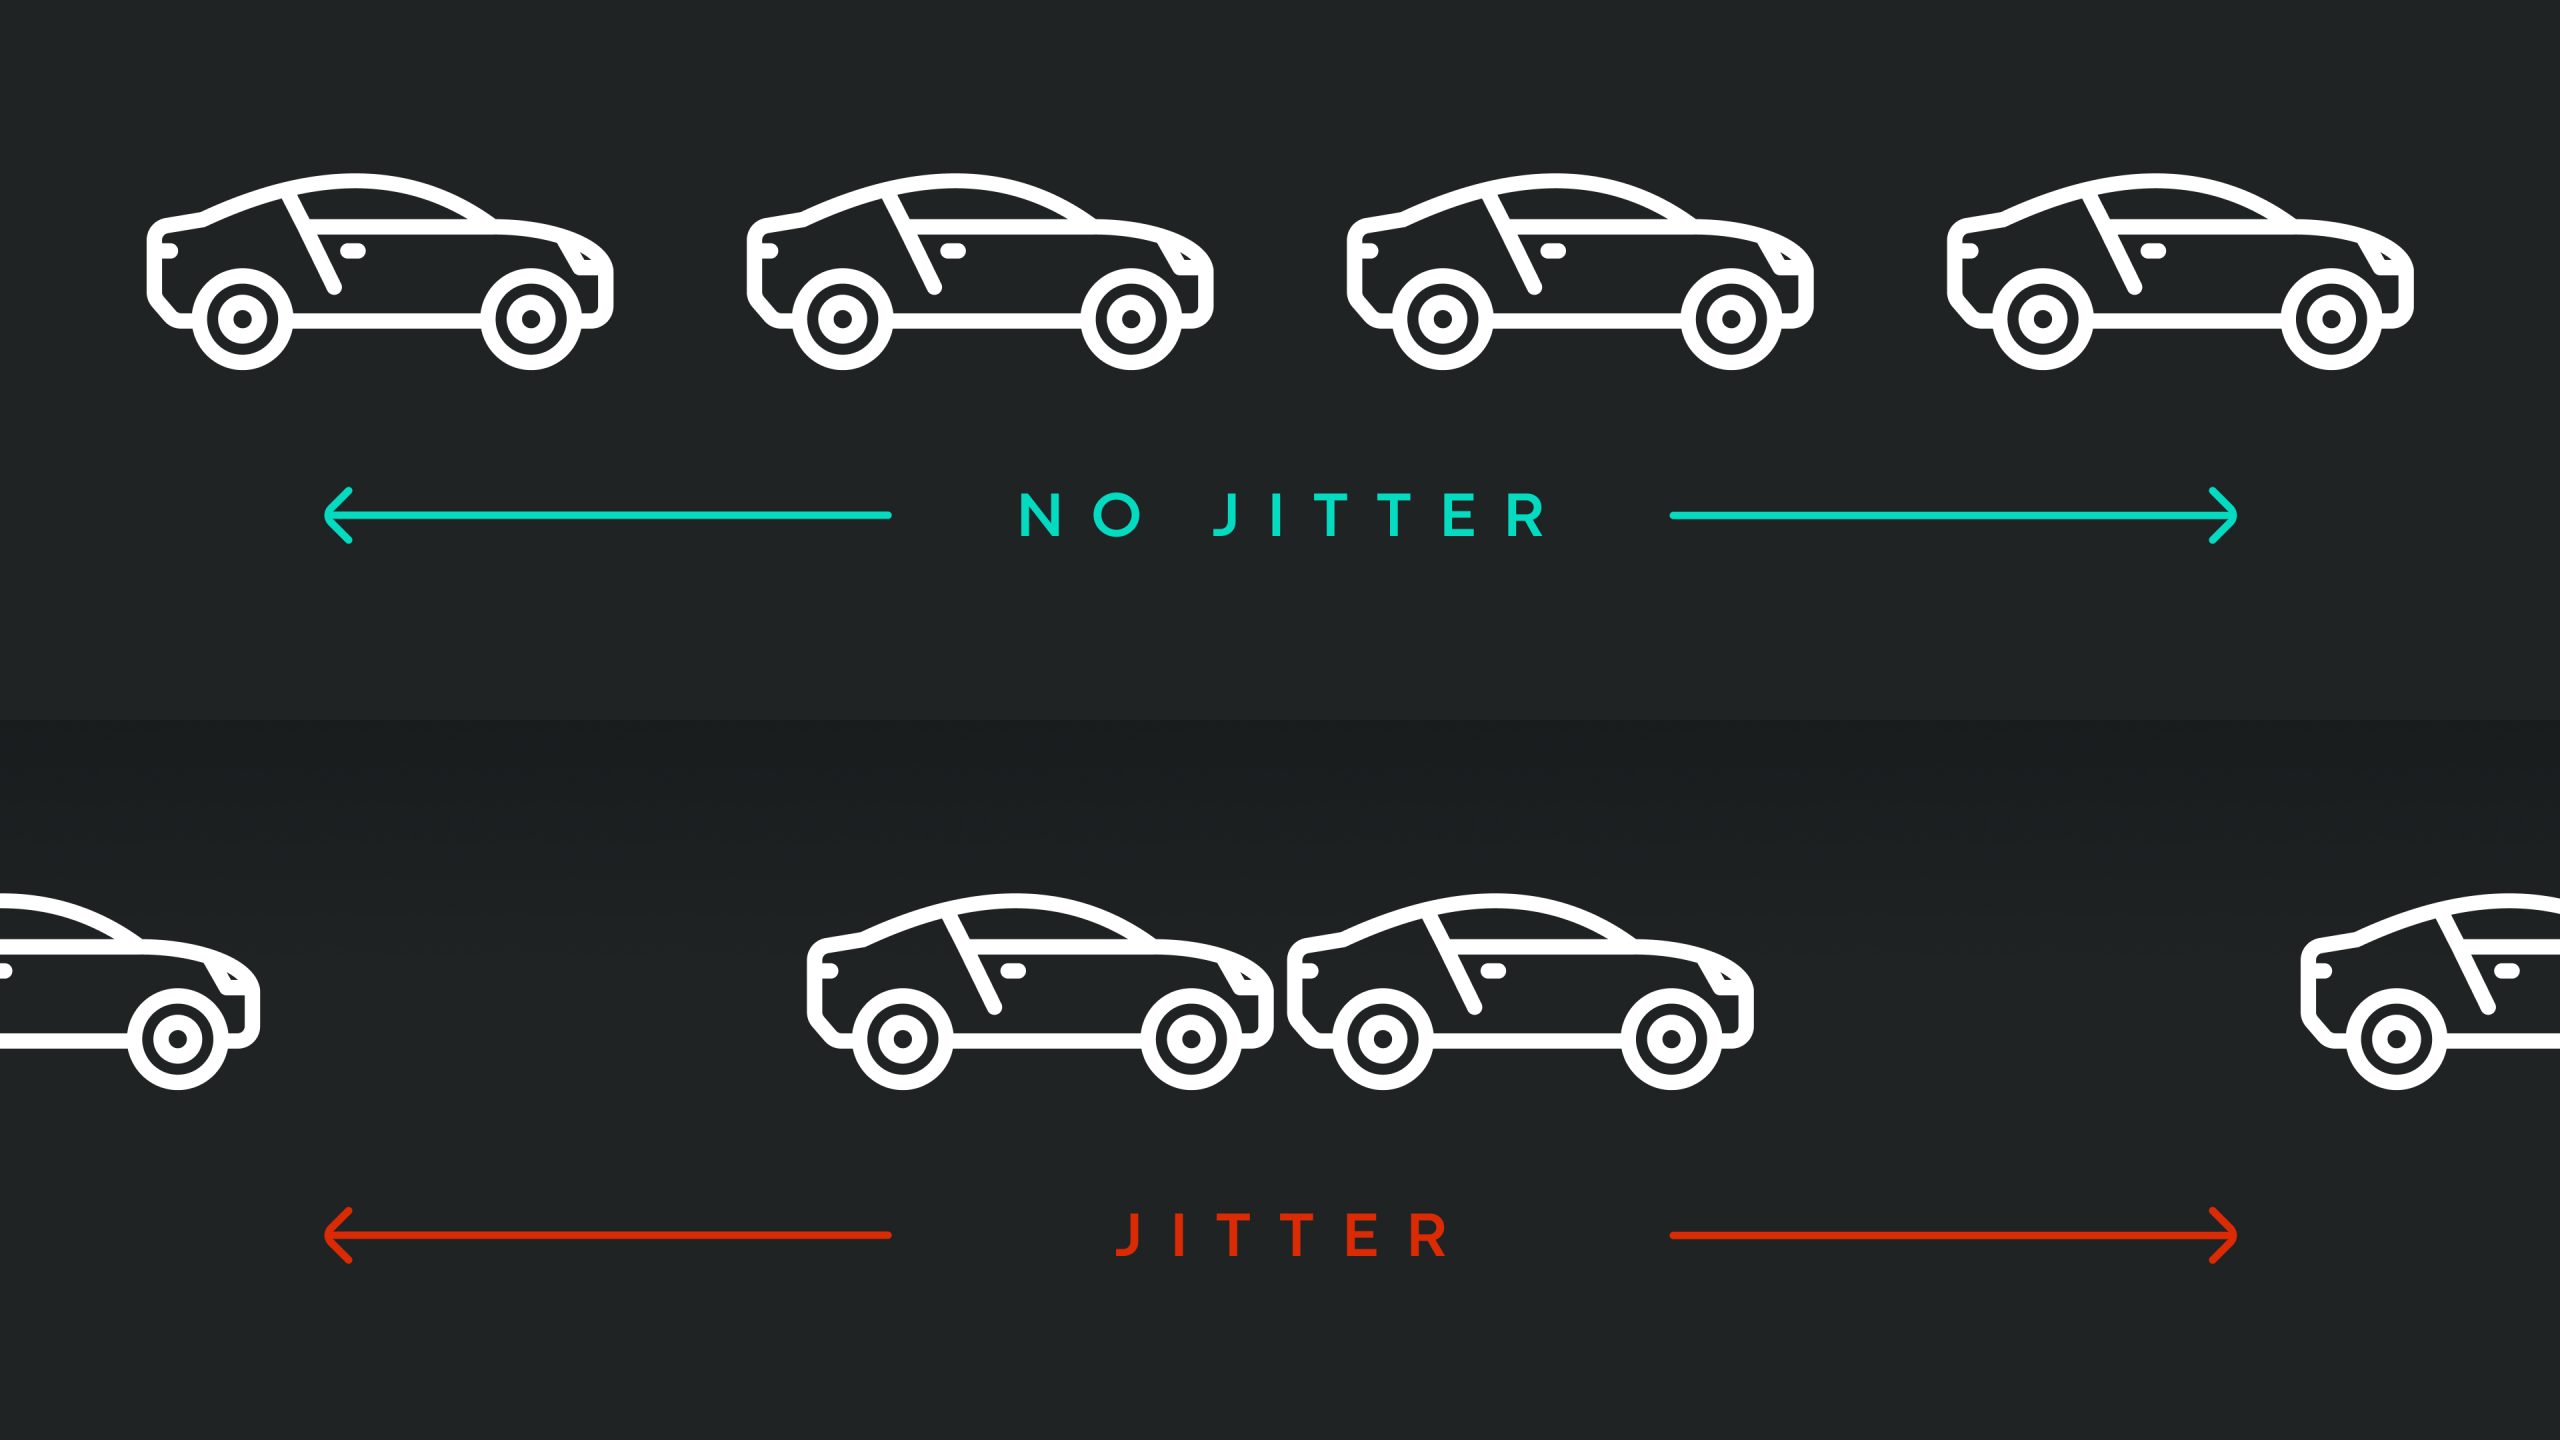 Diagram illustrating the concept of jitter using a row of cars